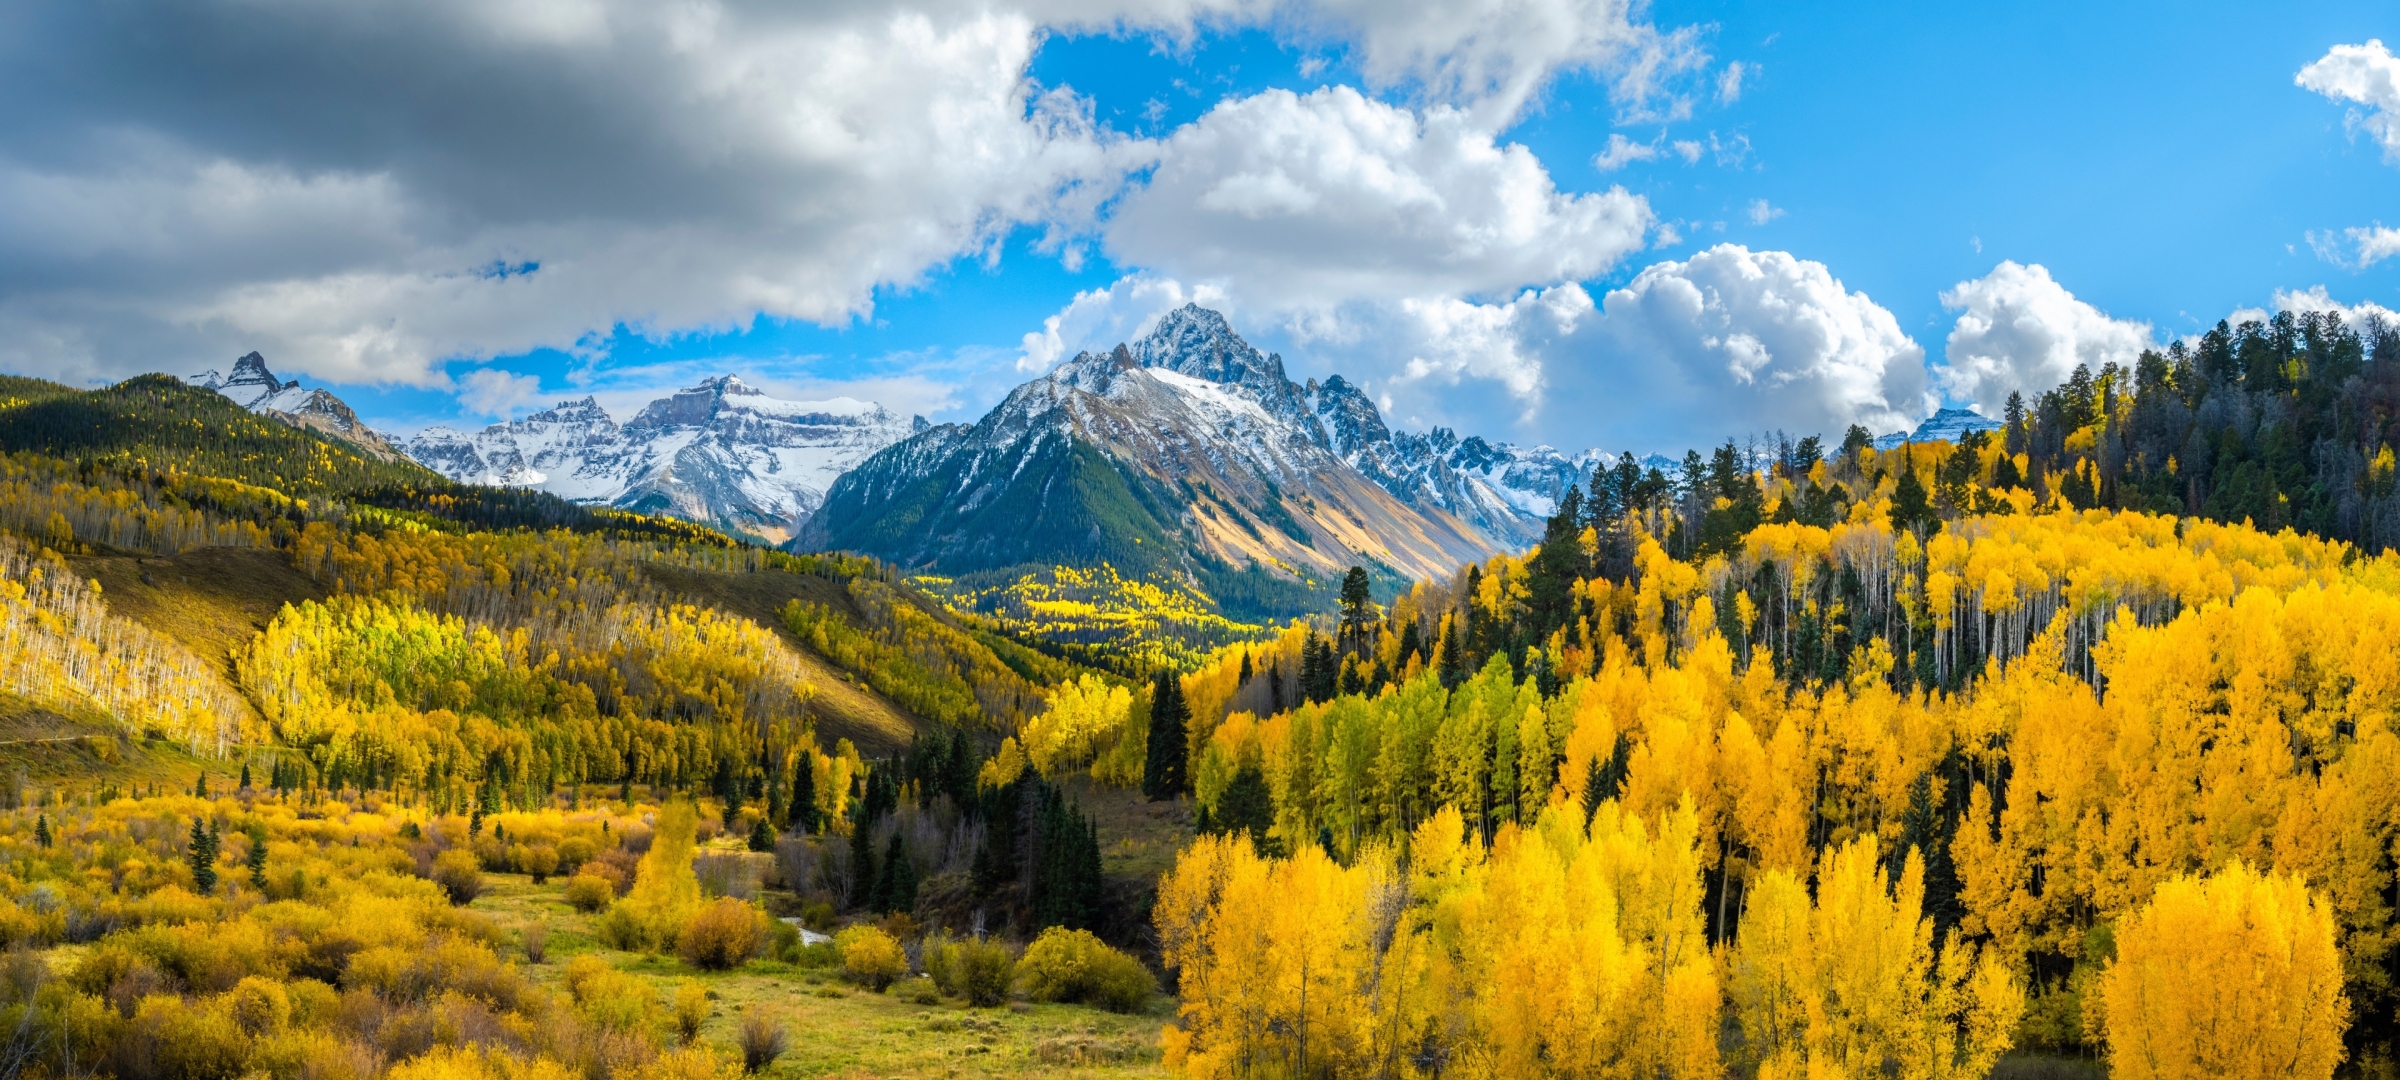 2400x1080 Yellow Forest Landscape 4k Mountains 2400x1080 Resolution ...